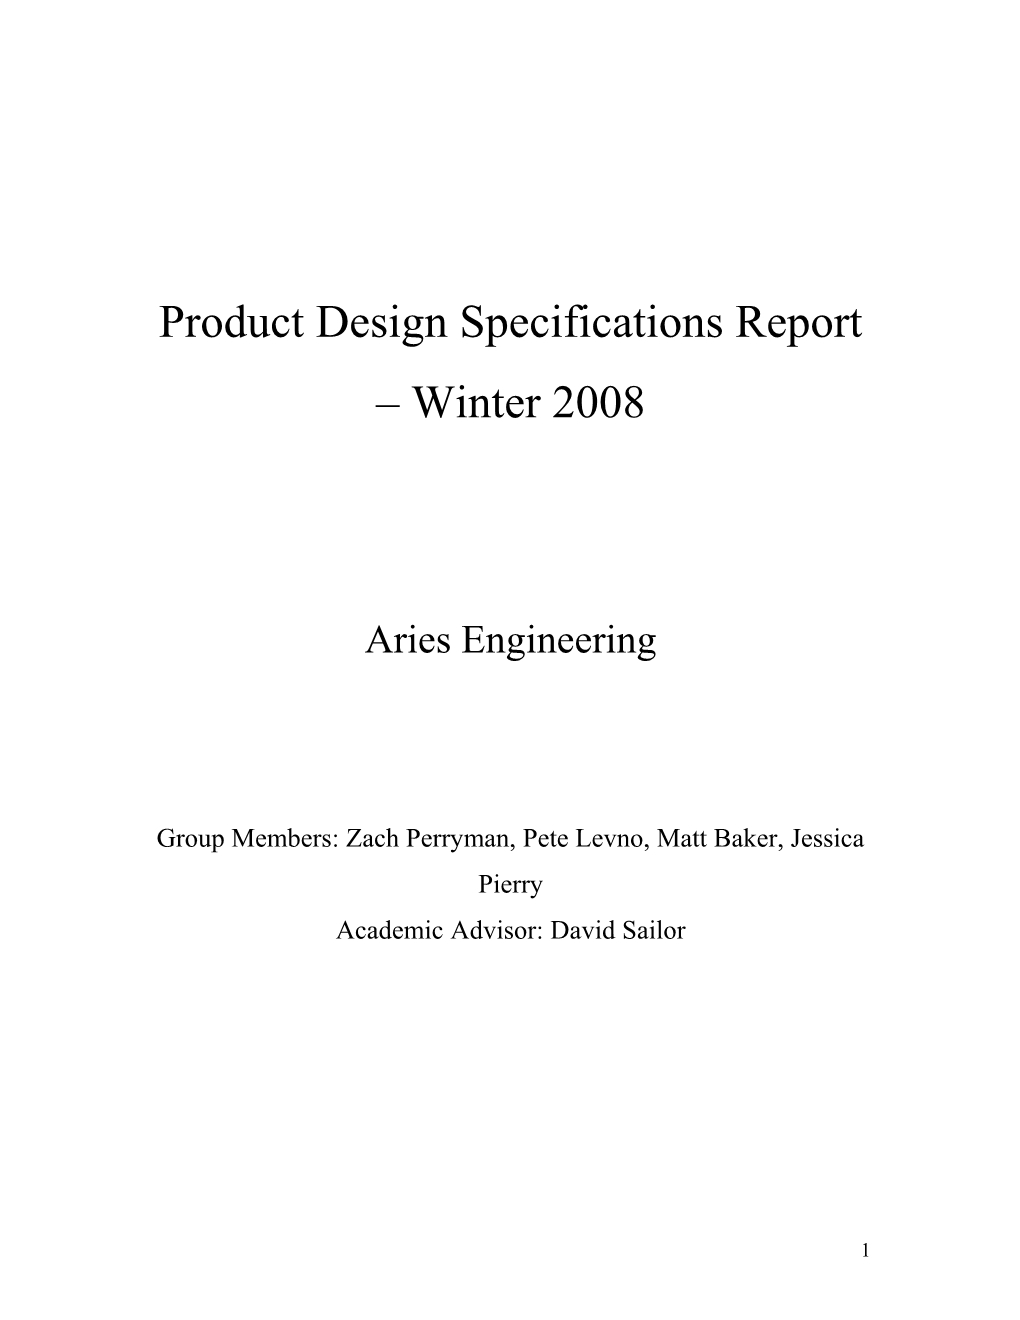 Product Design Specifications Report Winter 2008